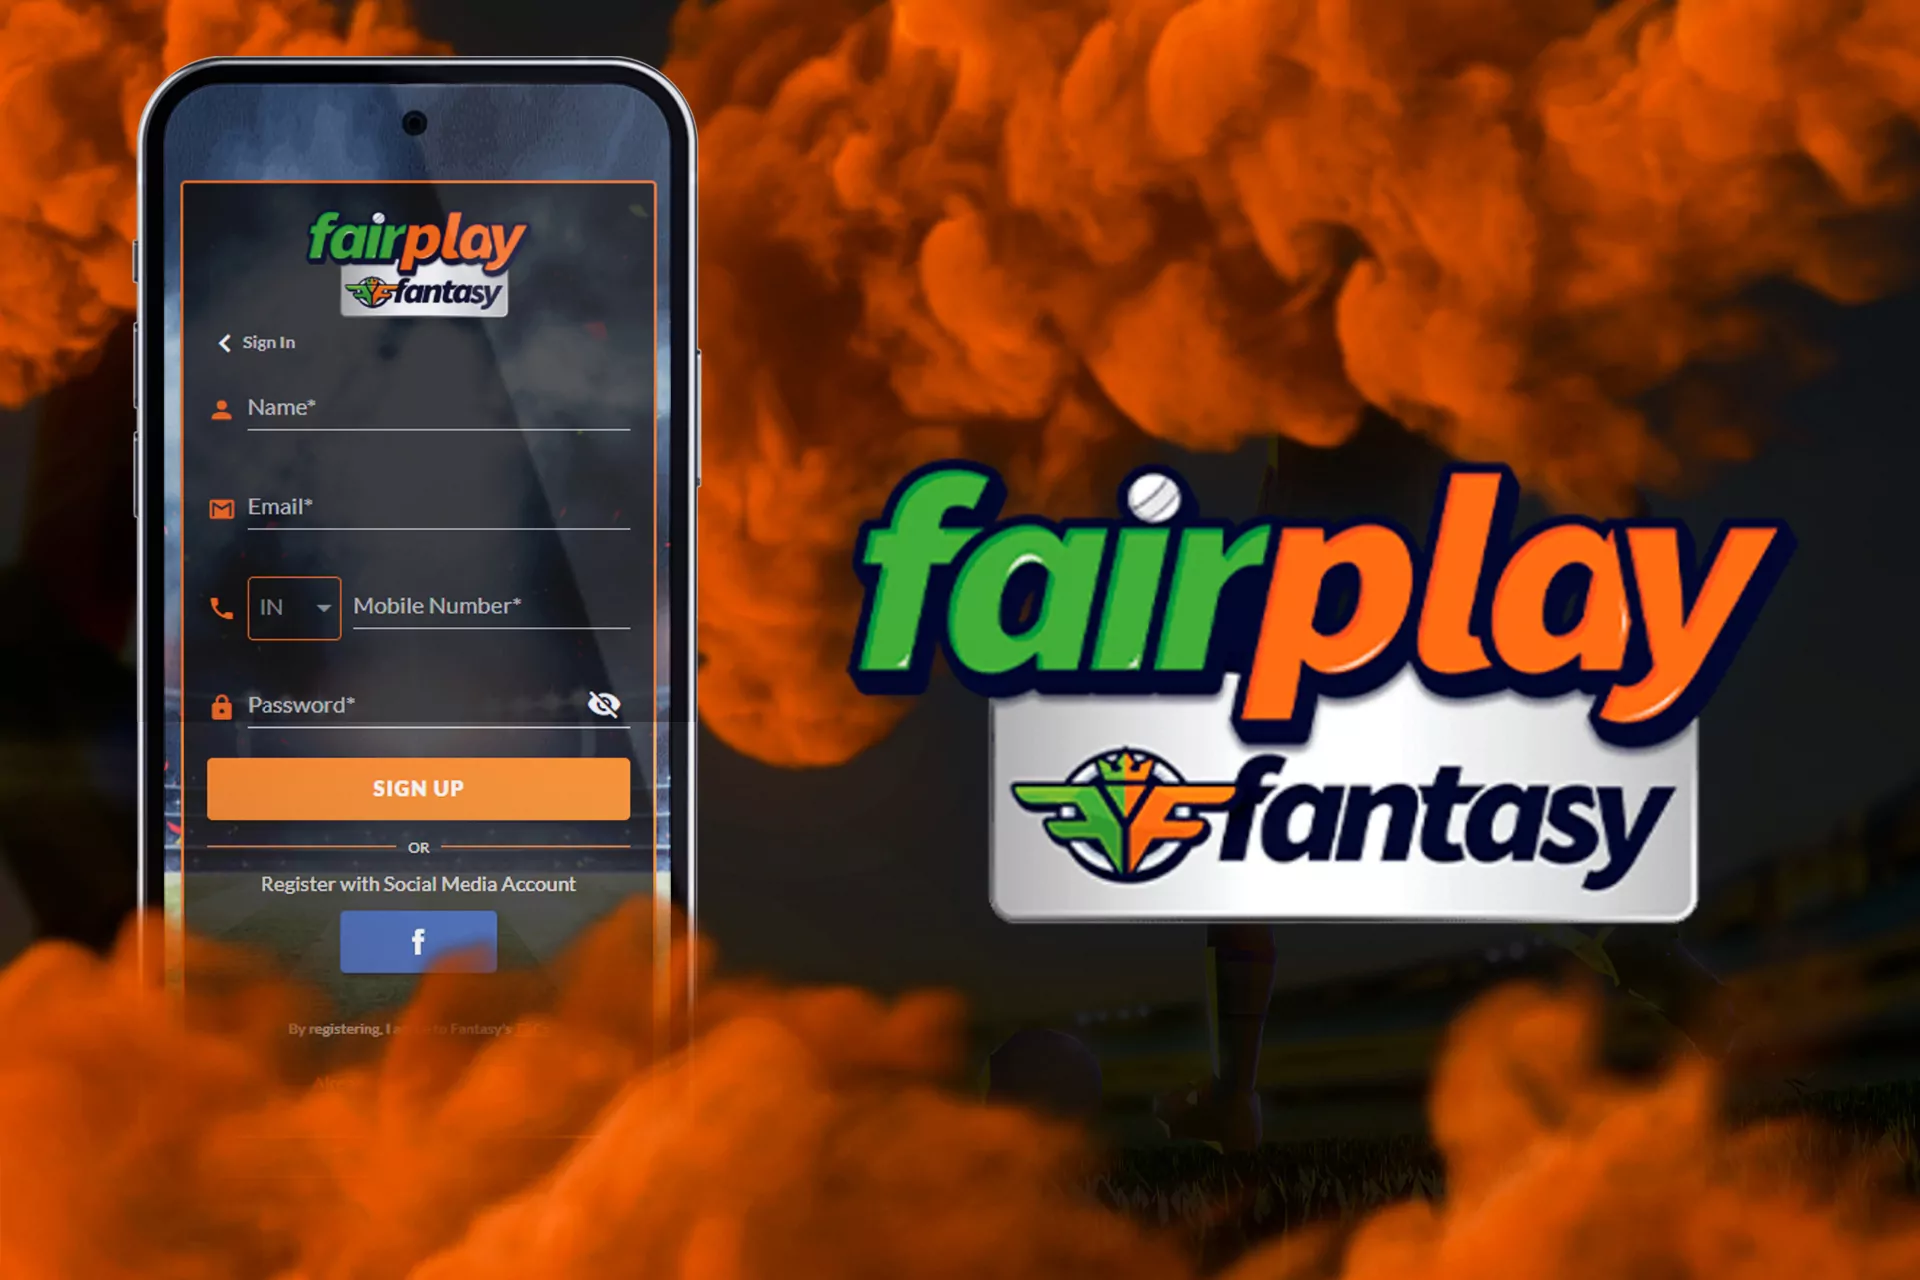 For the betting on Fantasy Sports, there is a special app made by the Fairplay team.